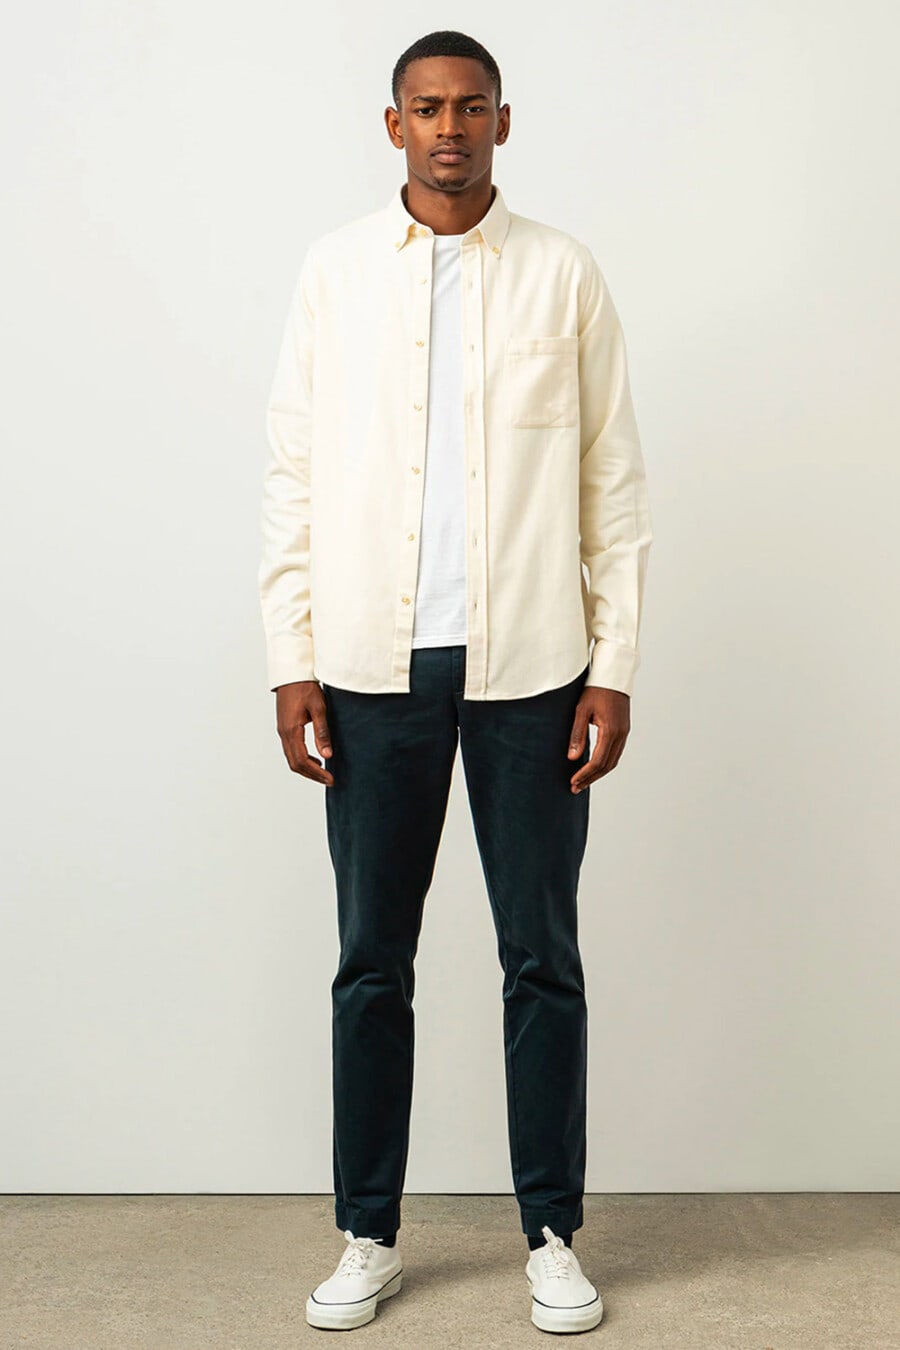 Men's navy pants, white T-shirt, off-white shacket and white canvas sneakers outfit